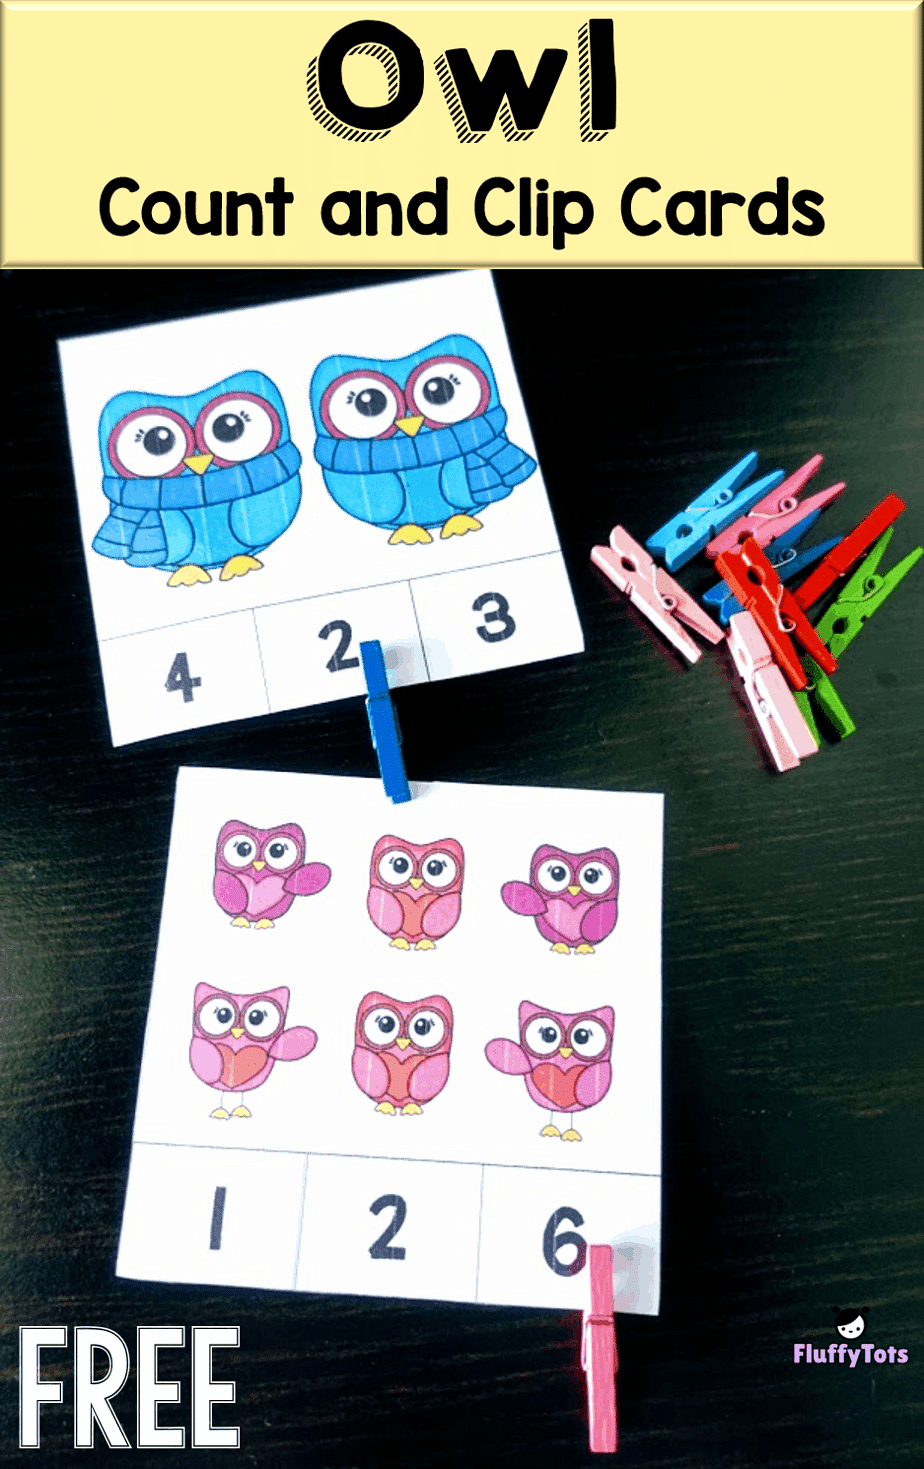 Owl count and clip cards